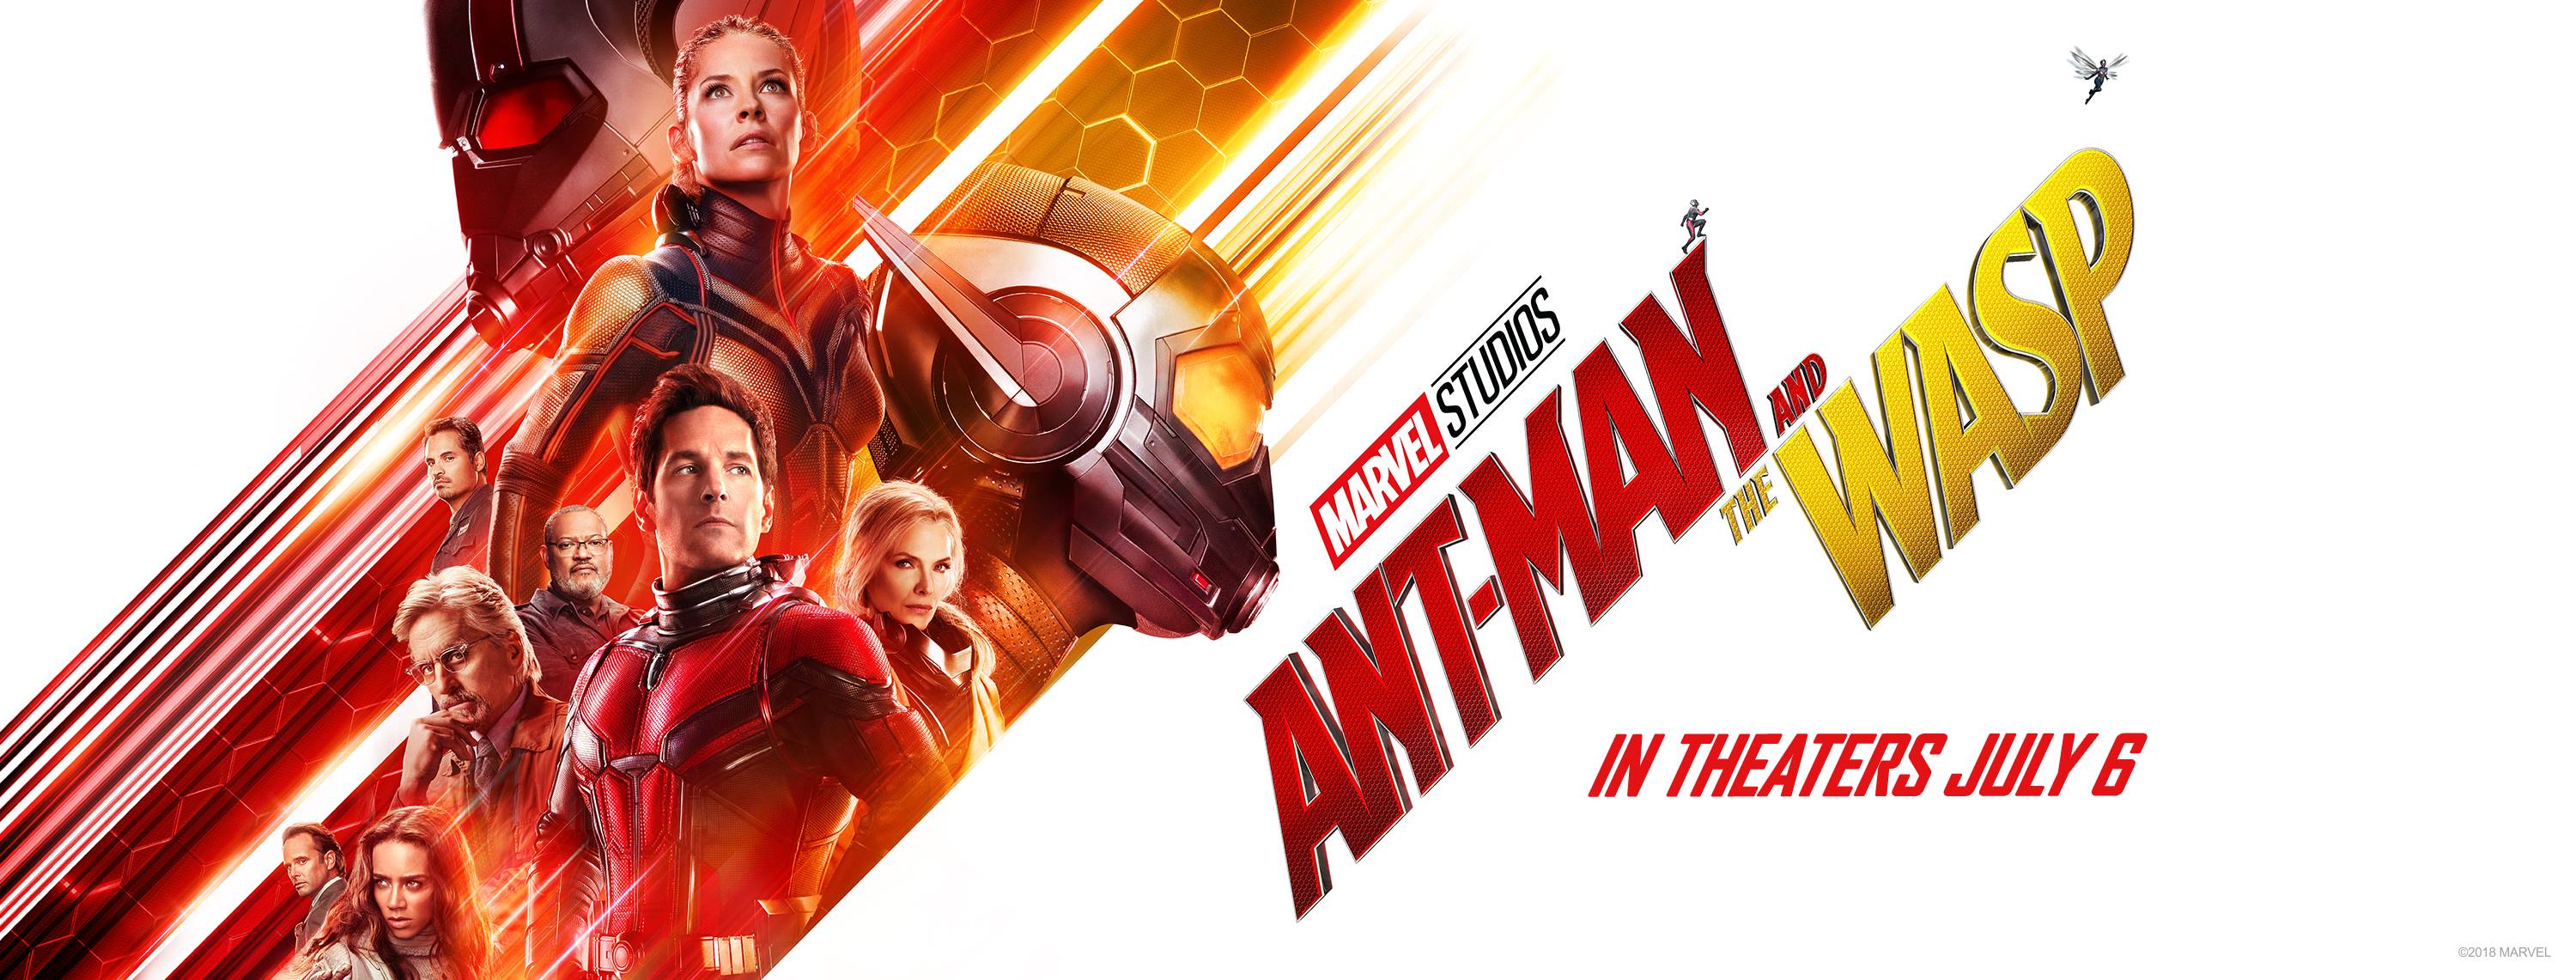 Watch the Red Carpet World Premiere of ‘Ant-Man and The Wasp’ Live Tonight!